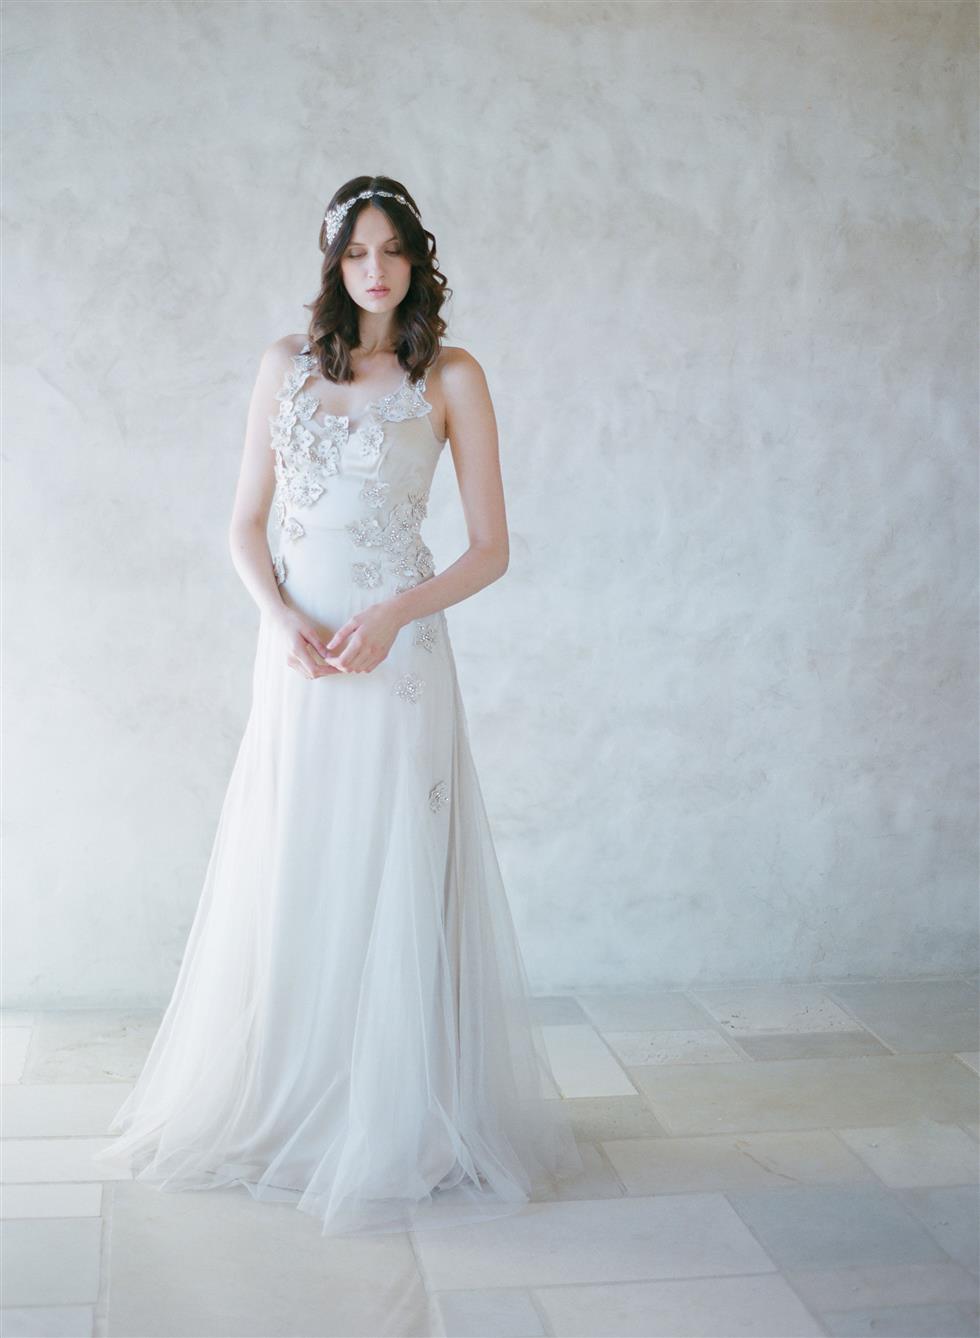 The Beautiful 2015 Bridal Collection from Myra Callan for Twigs & Honey